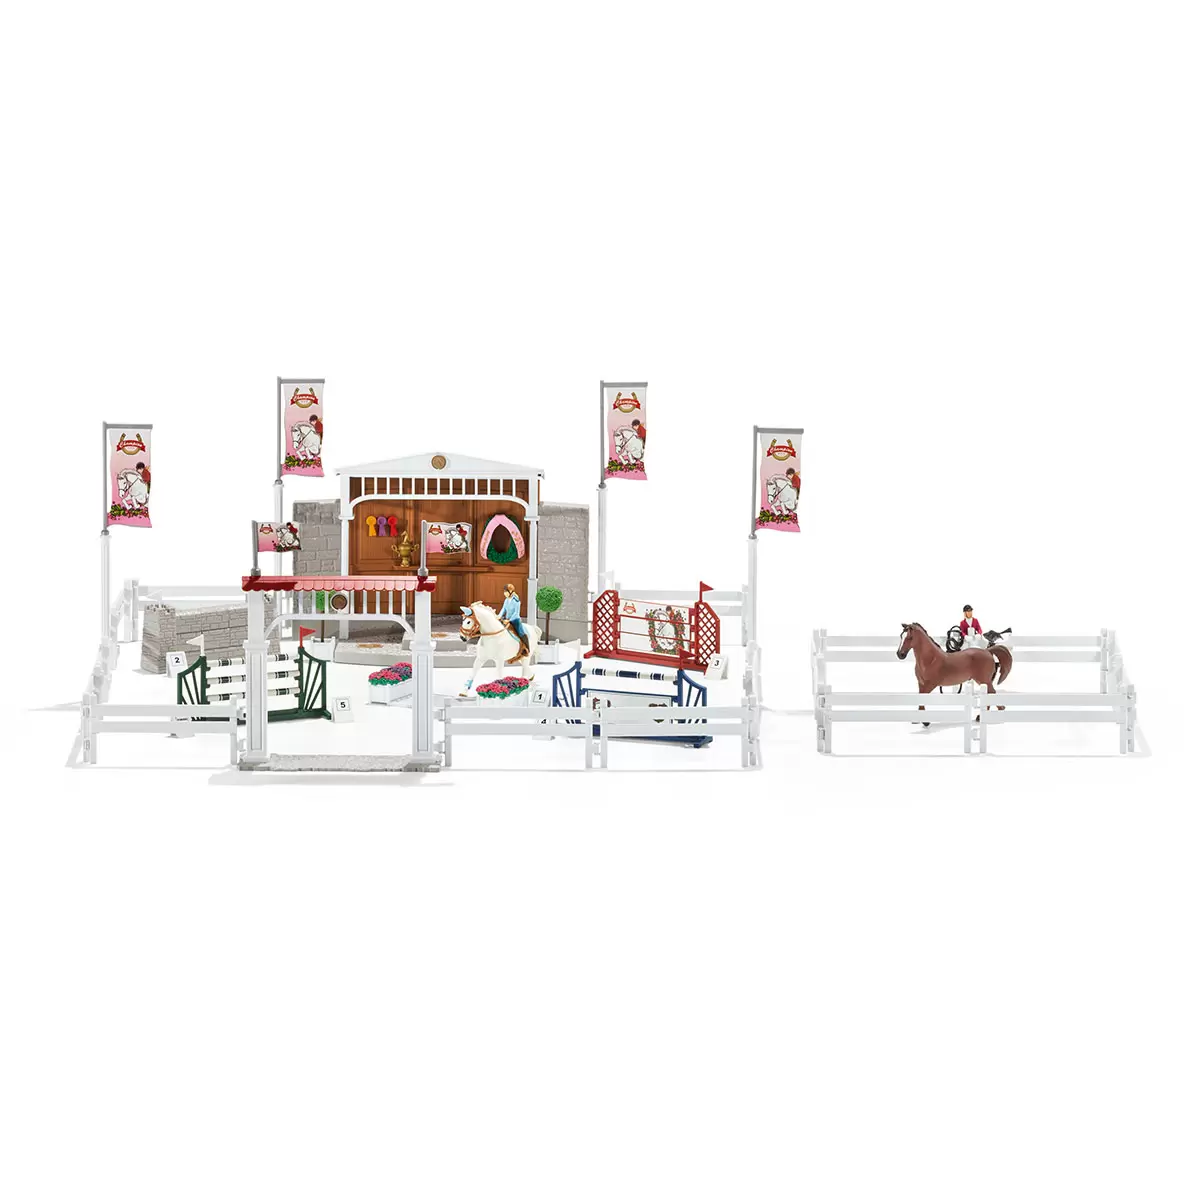 Buy Schleich Horse Club Set Box & Item Image at Costco.co.uk